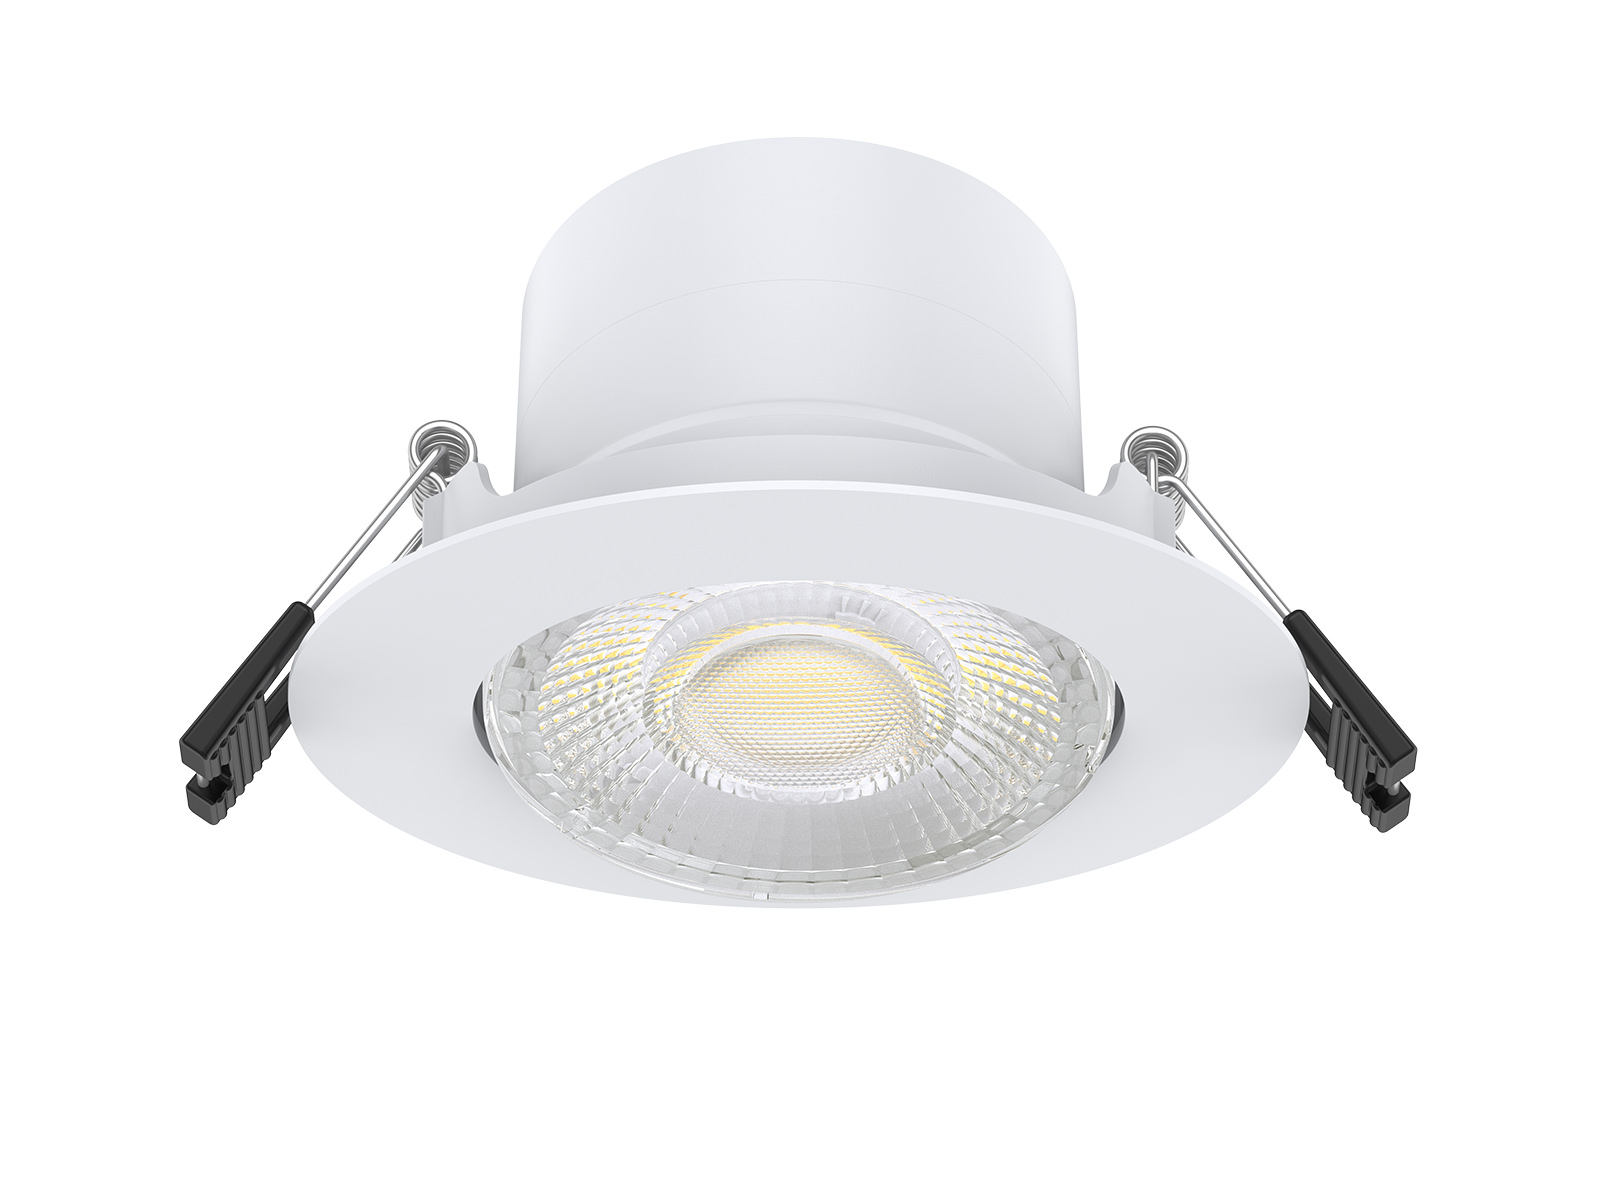 CL360 LED Downlight